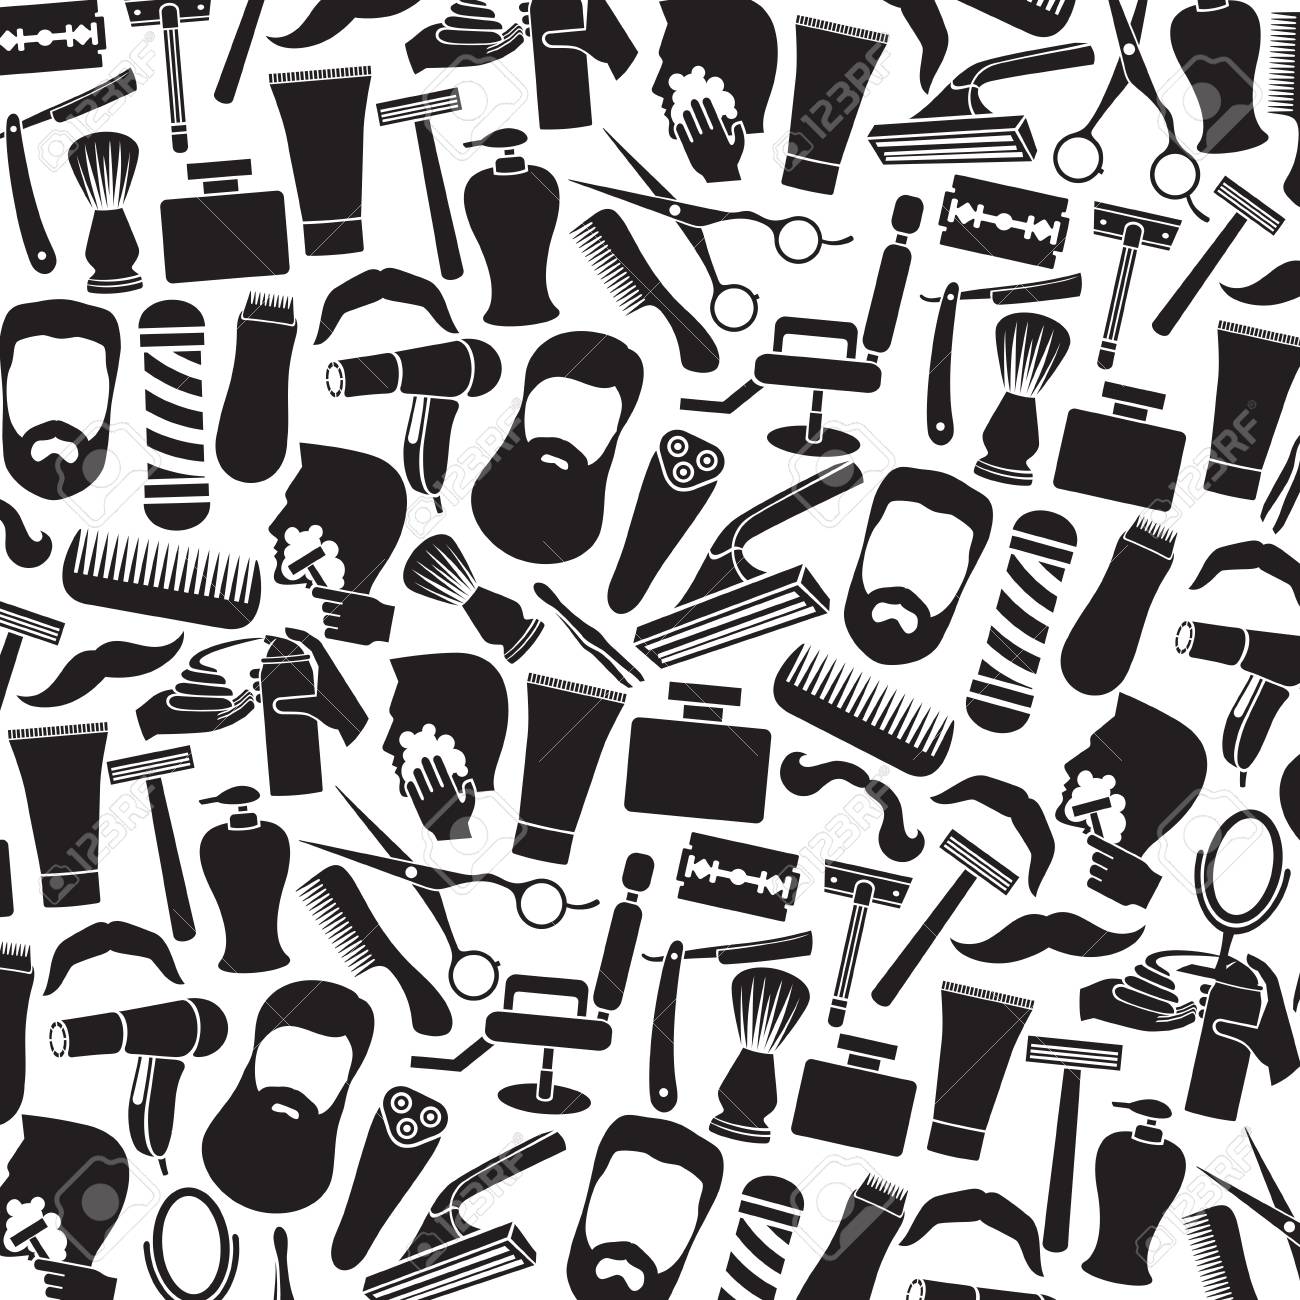 Background Pattern With Barber Salon Or Shop Icons Shaving Tools